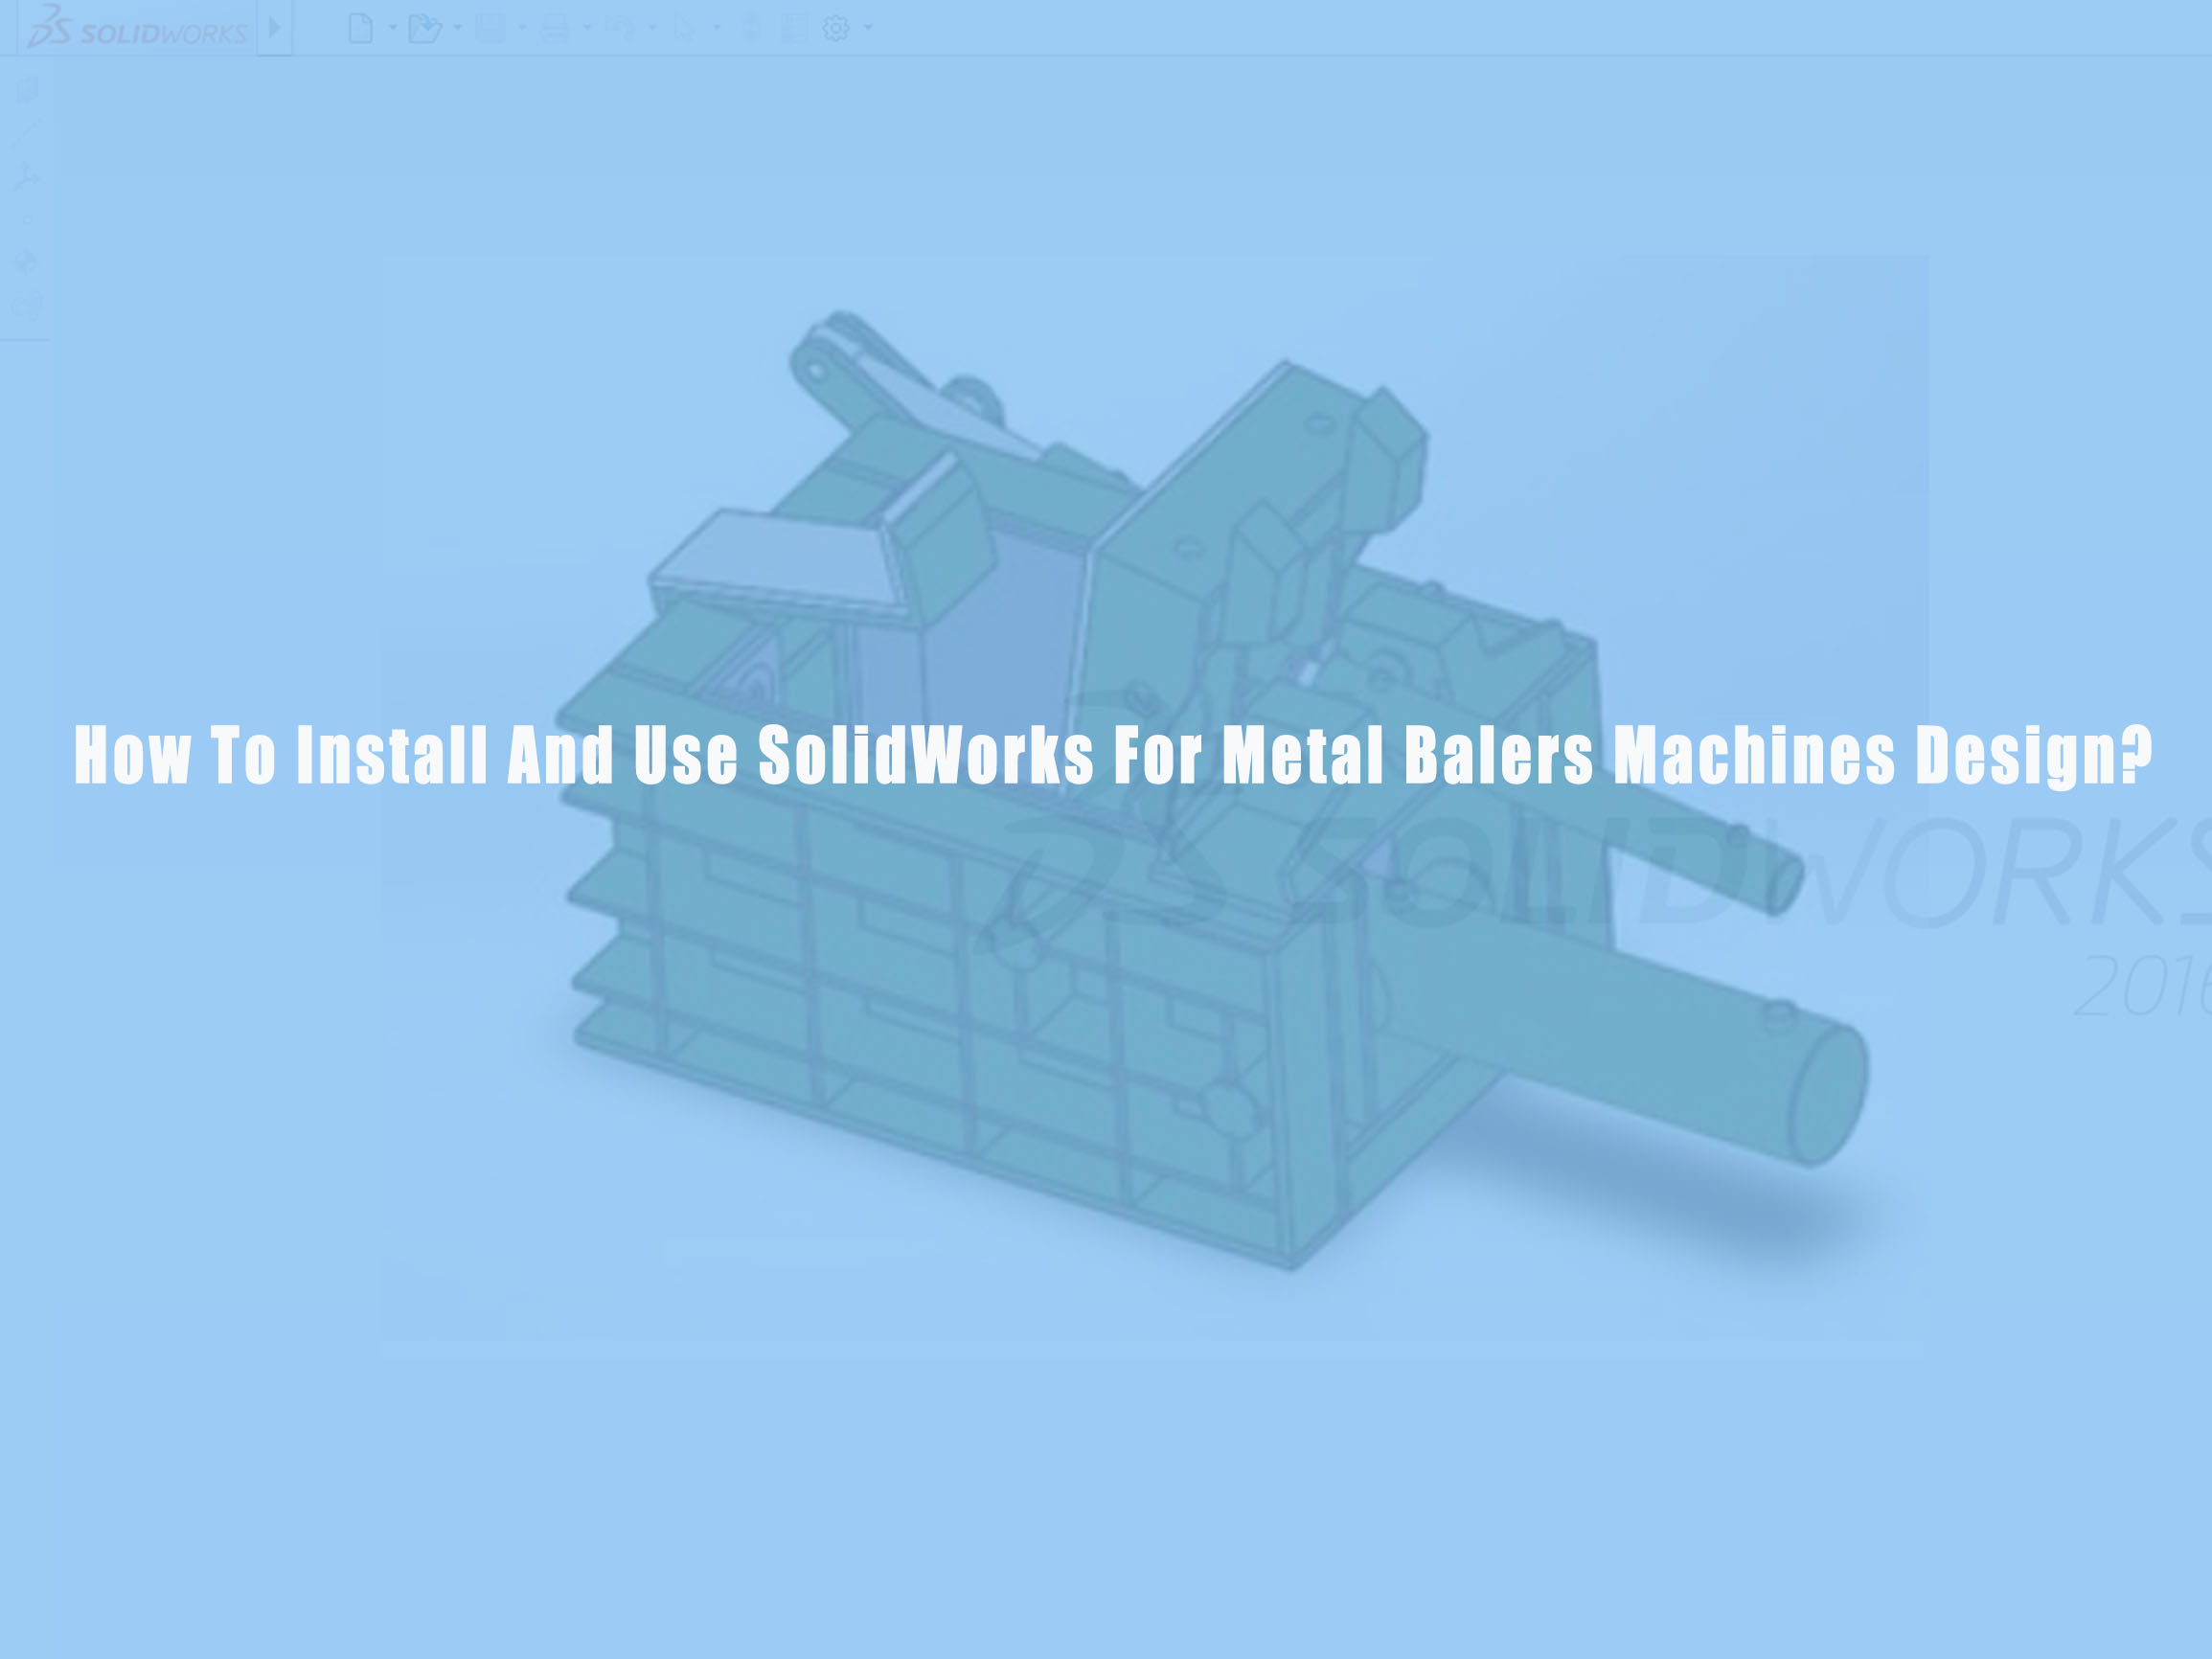 install-and-use-solidworks-for-metal-balers-machines-design